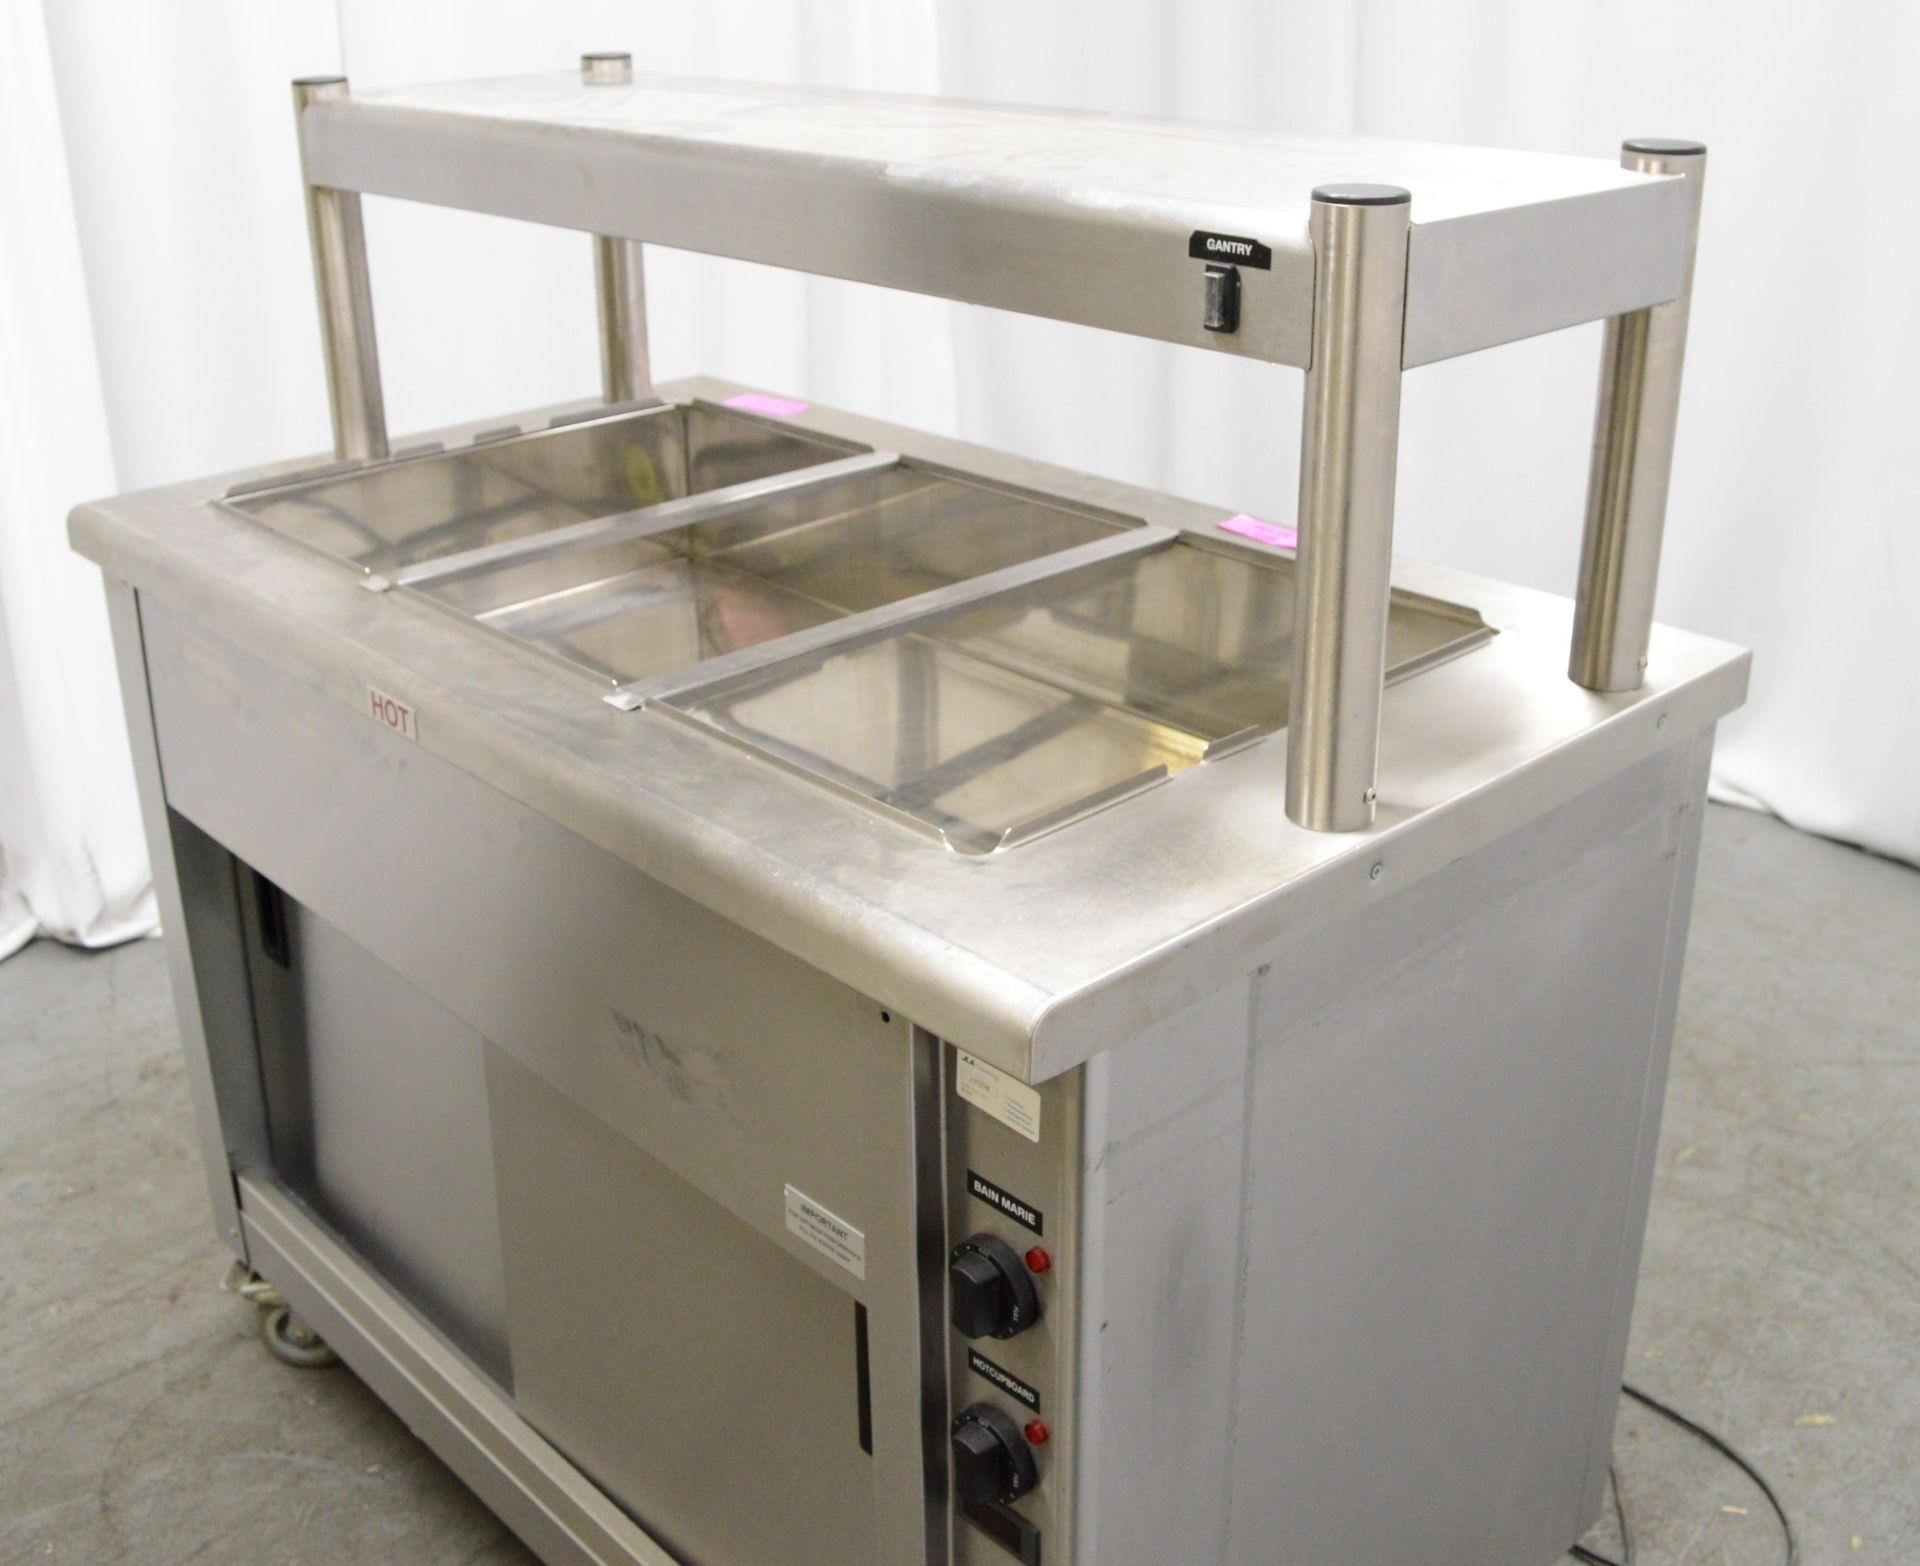 Victor SKEP12Z bain marie & hot cupboard, 1 phase electric - Image 6 of 9